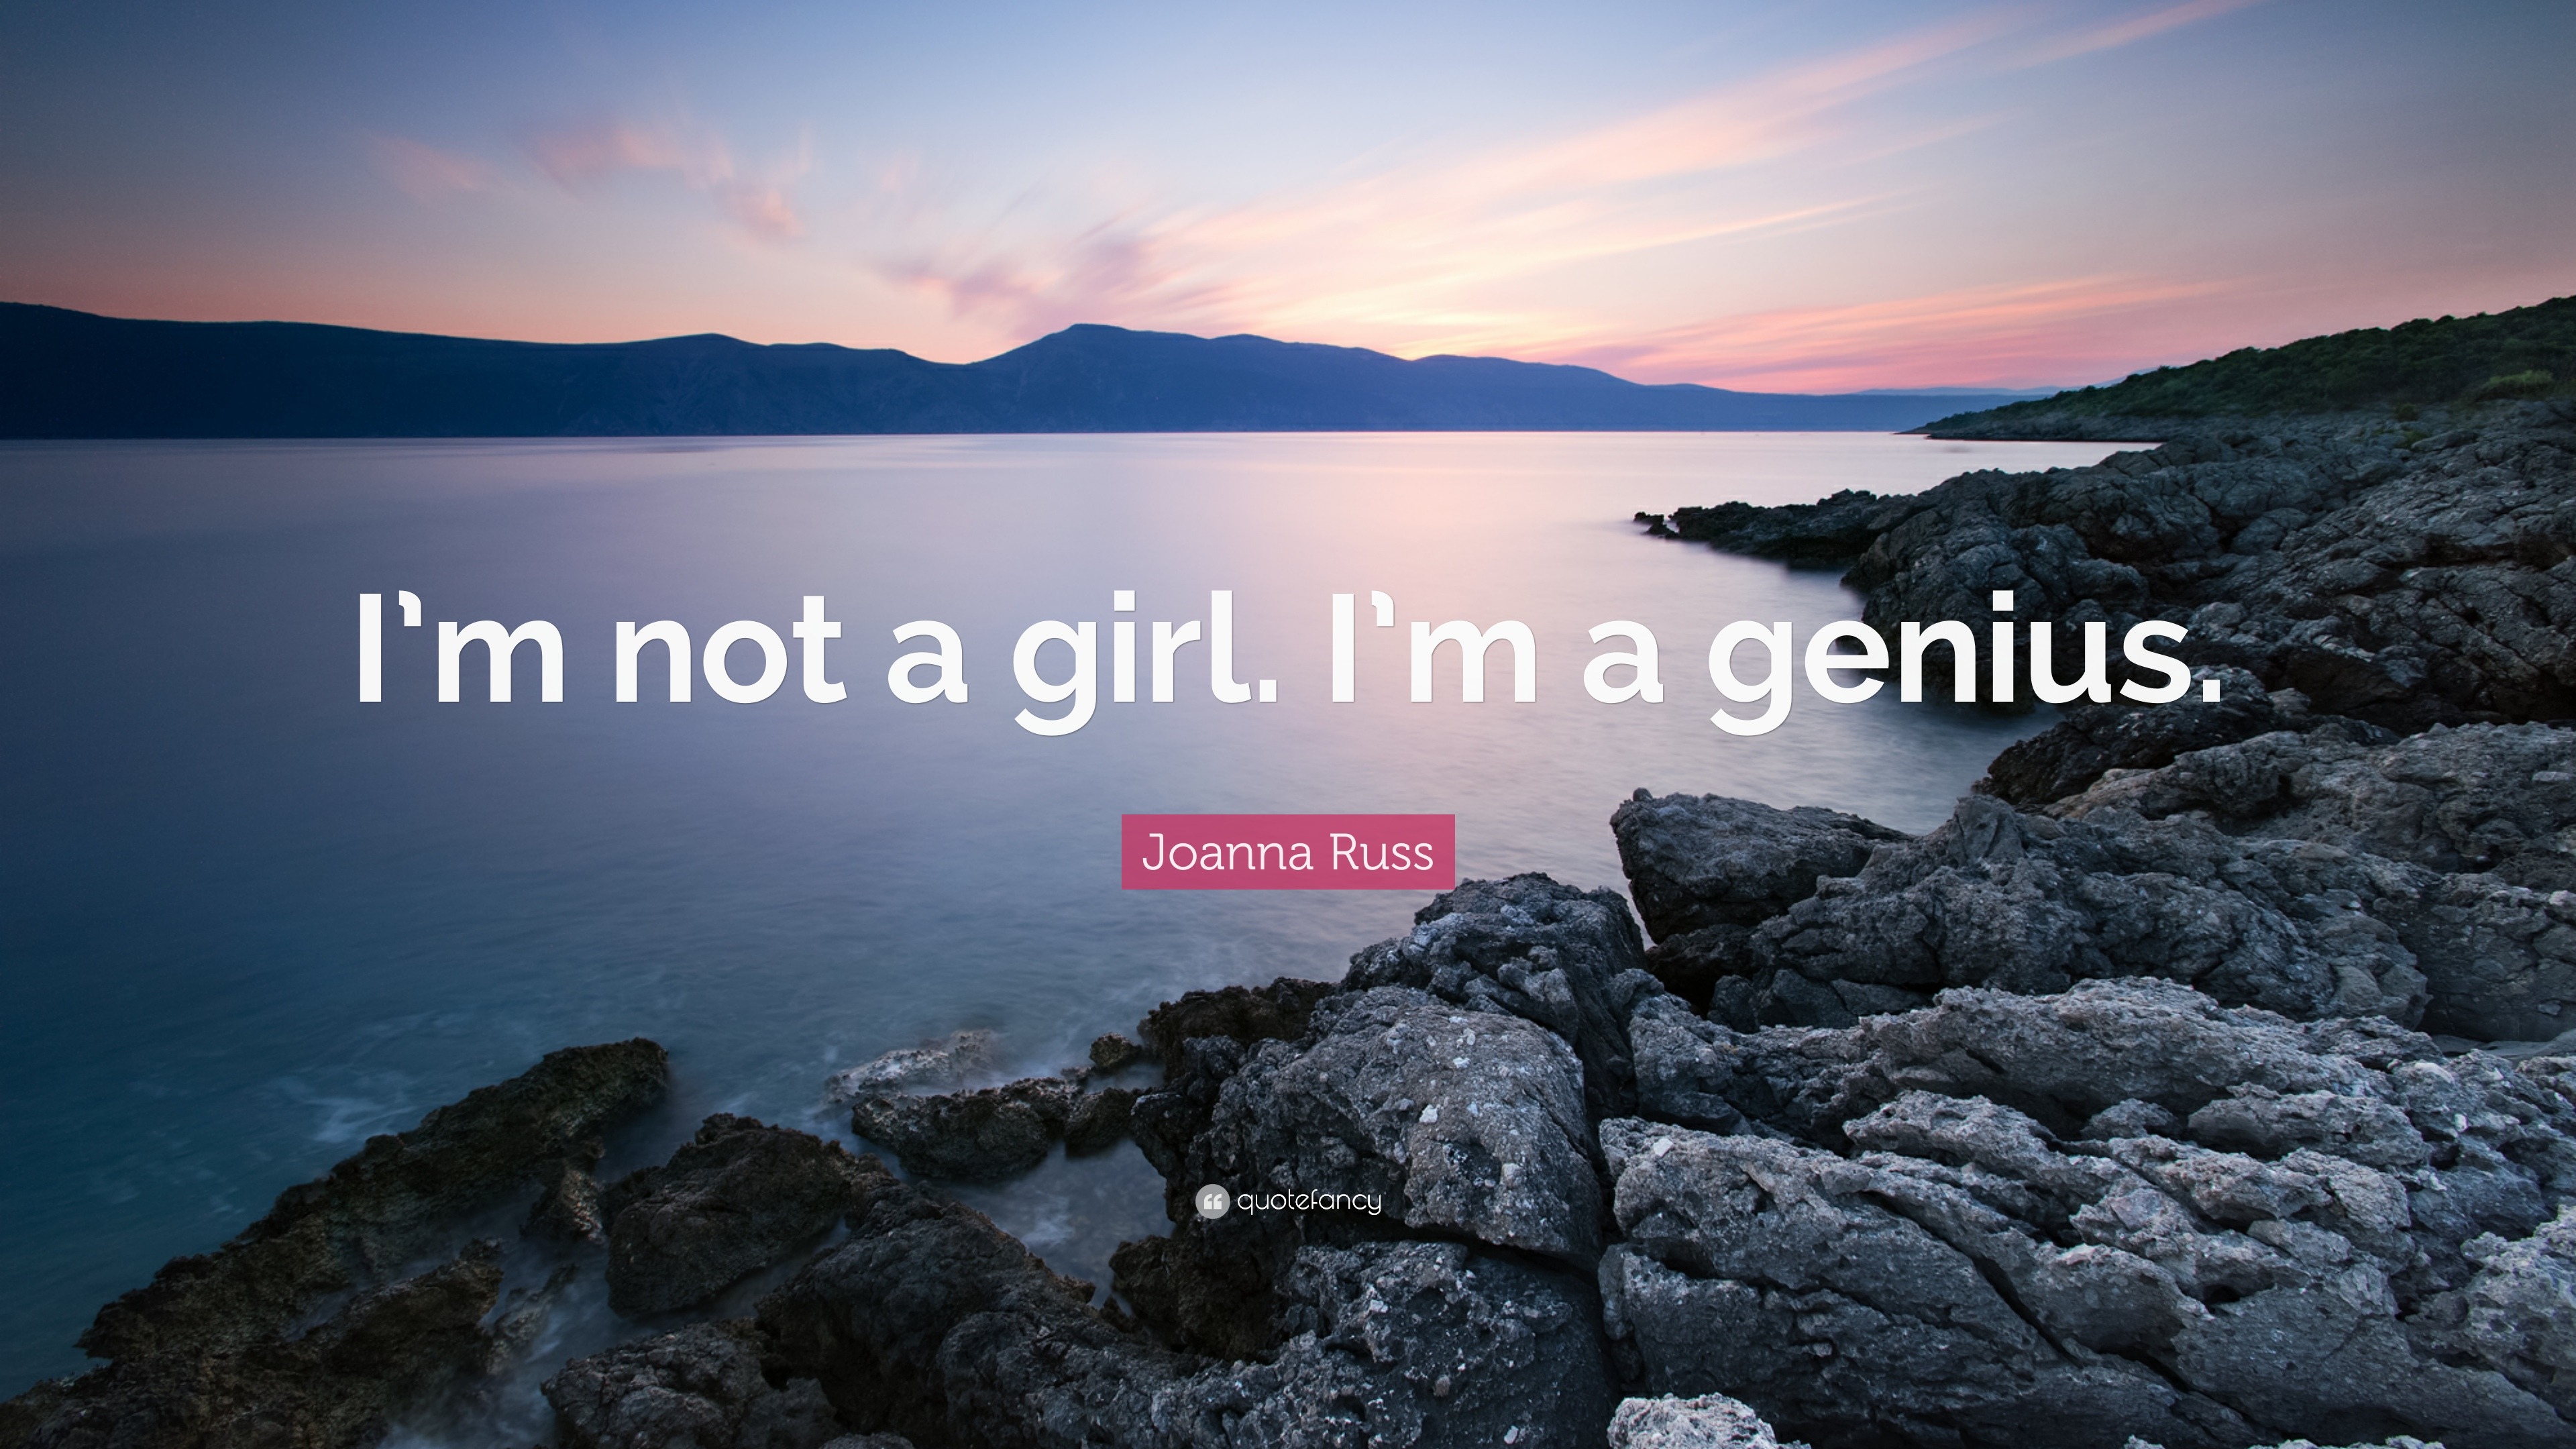 Joanna Russ Quote: “I'm not a girl. I'm